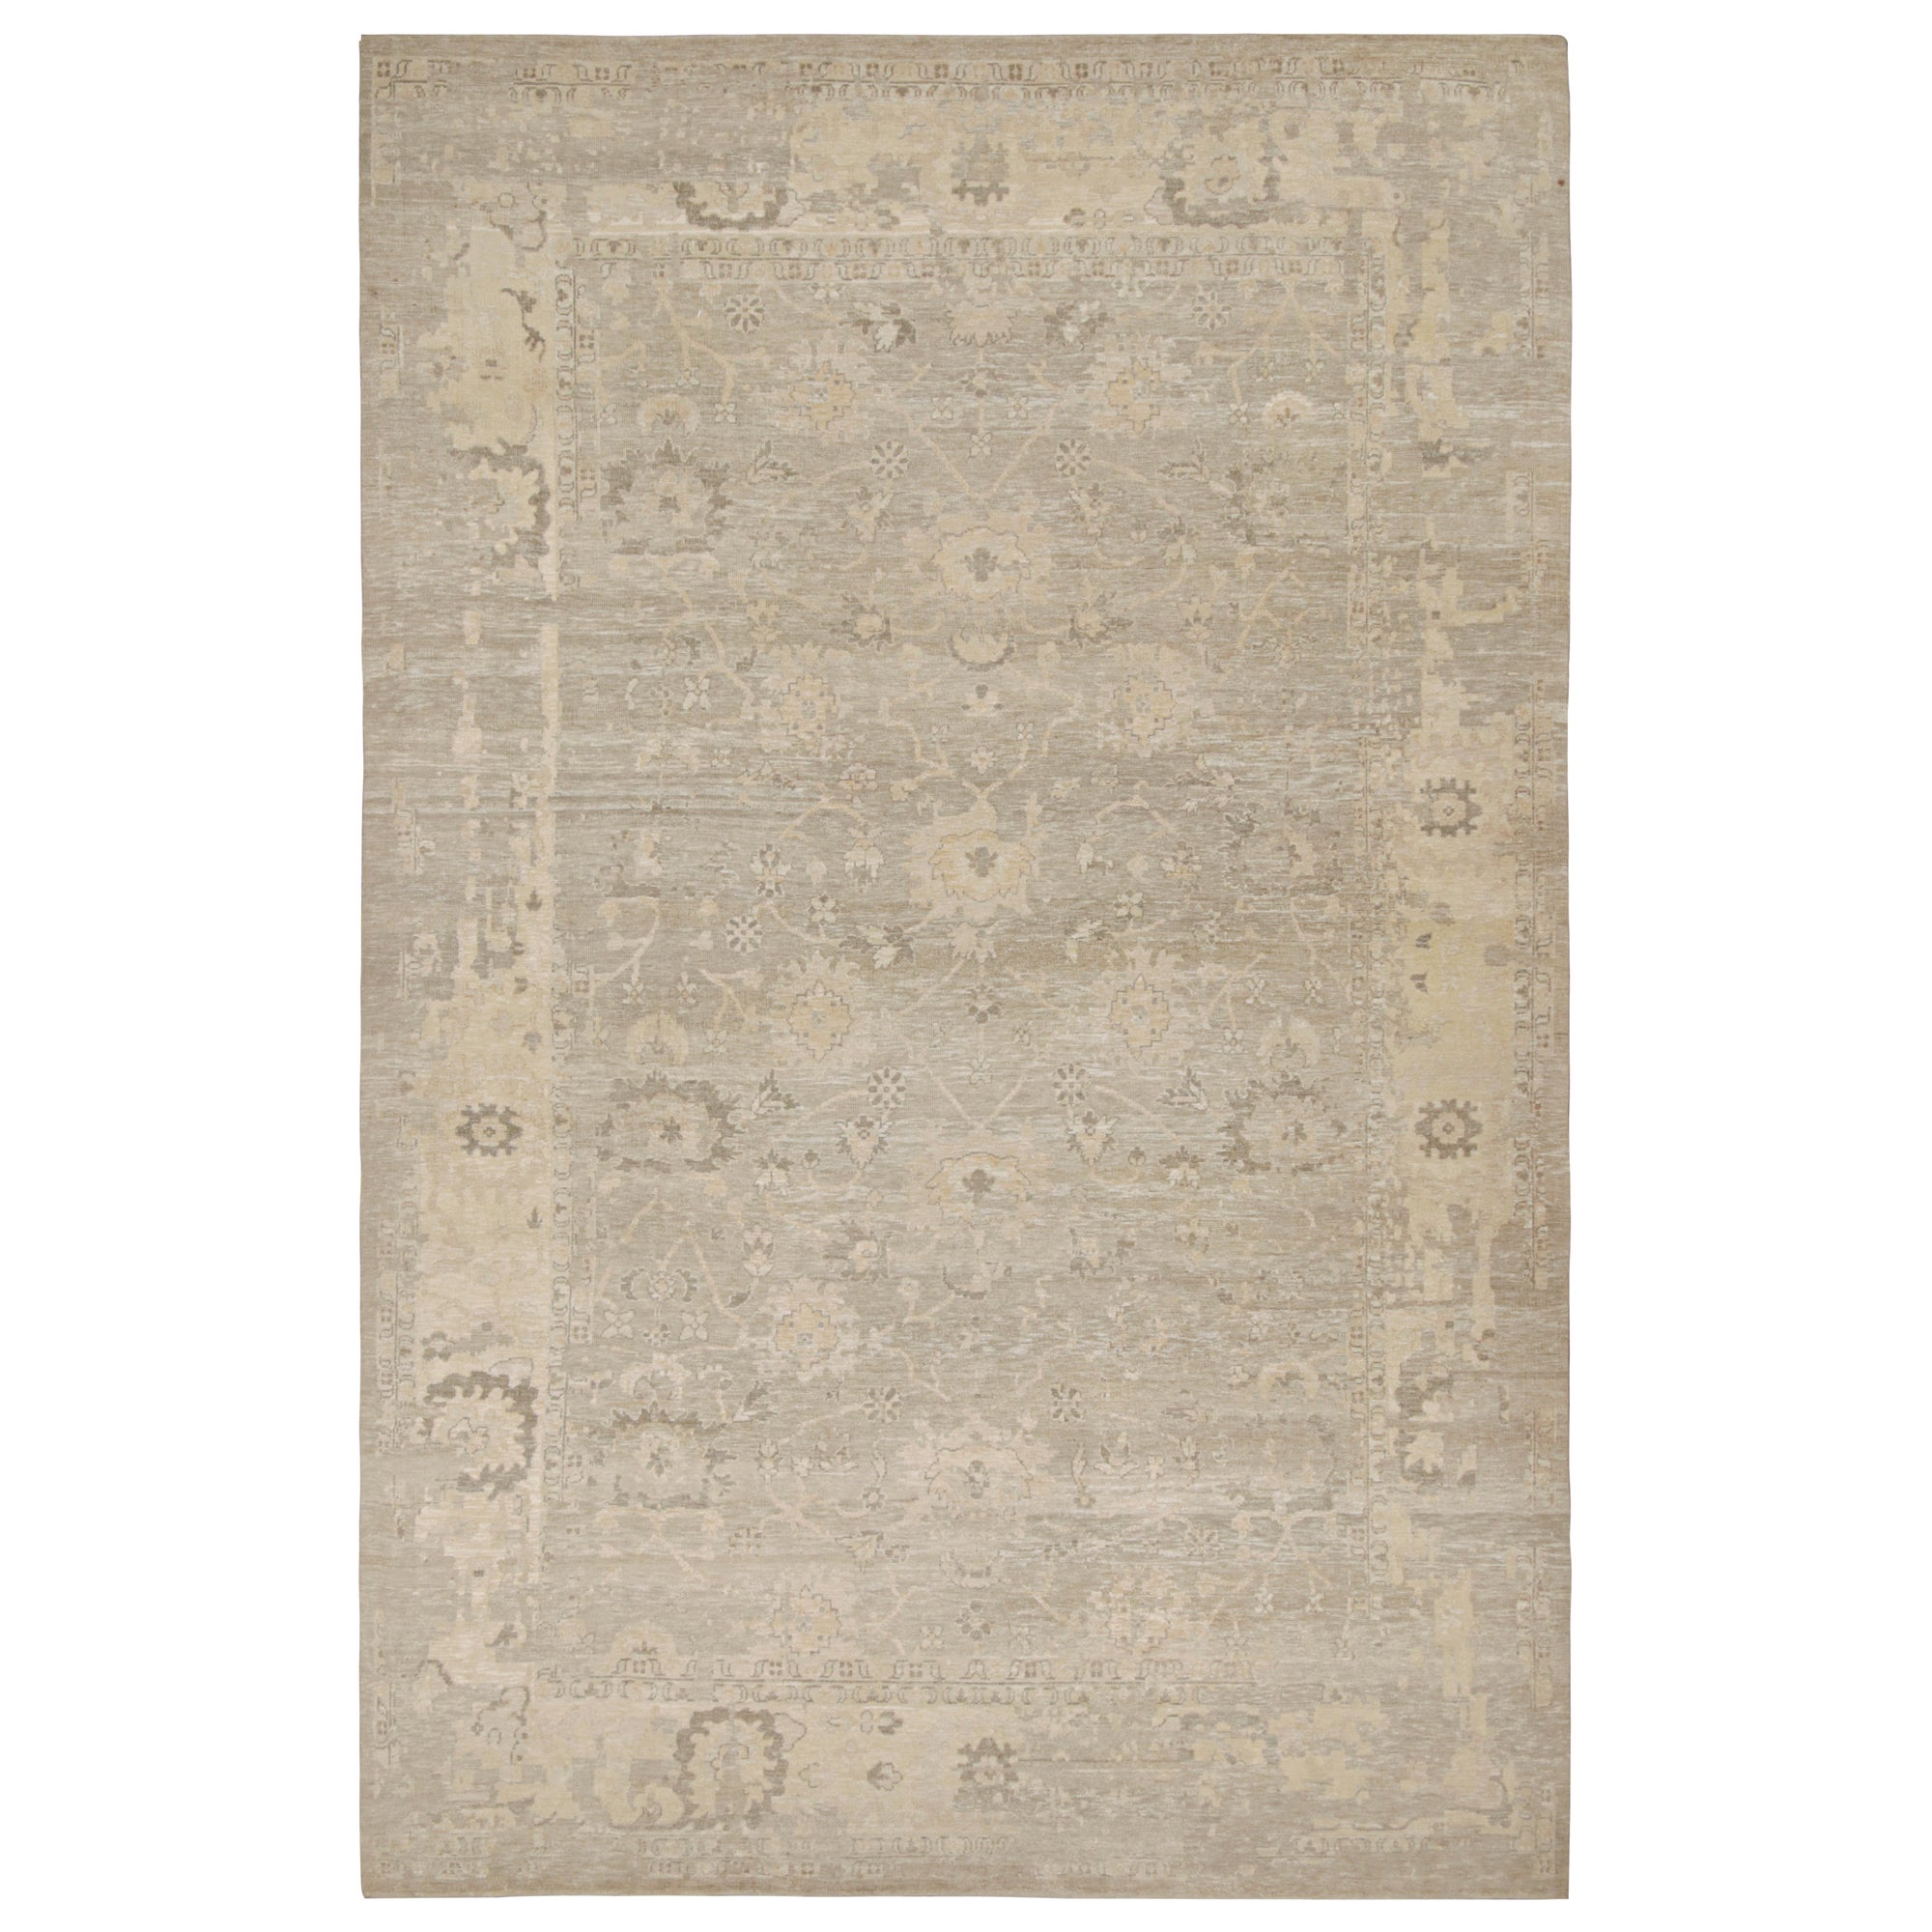 Rug & Kilim’s Oushak Style Oversized Rug in Greige with Floral Pattern